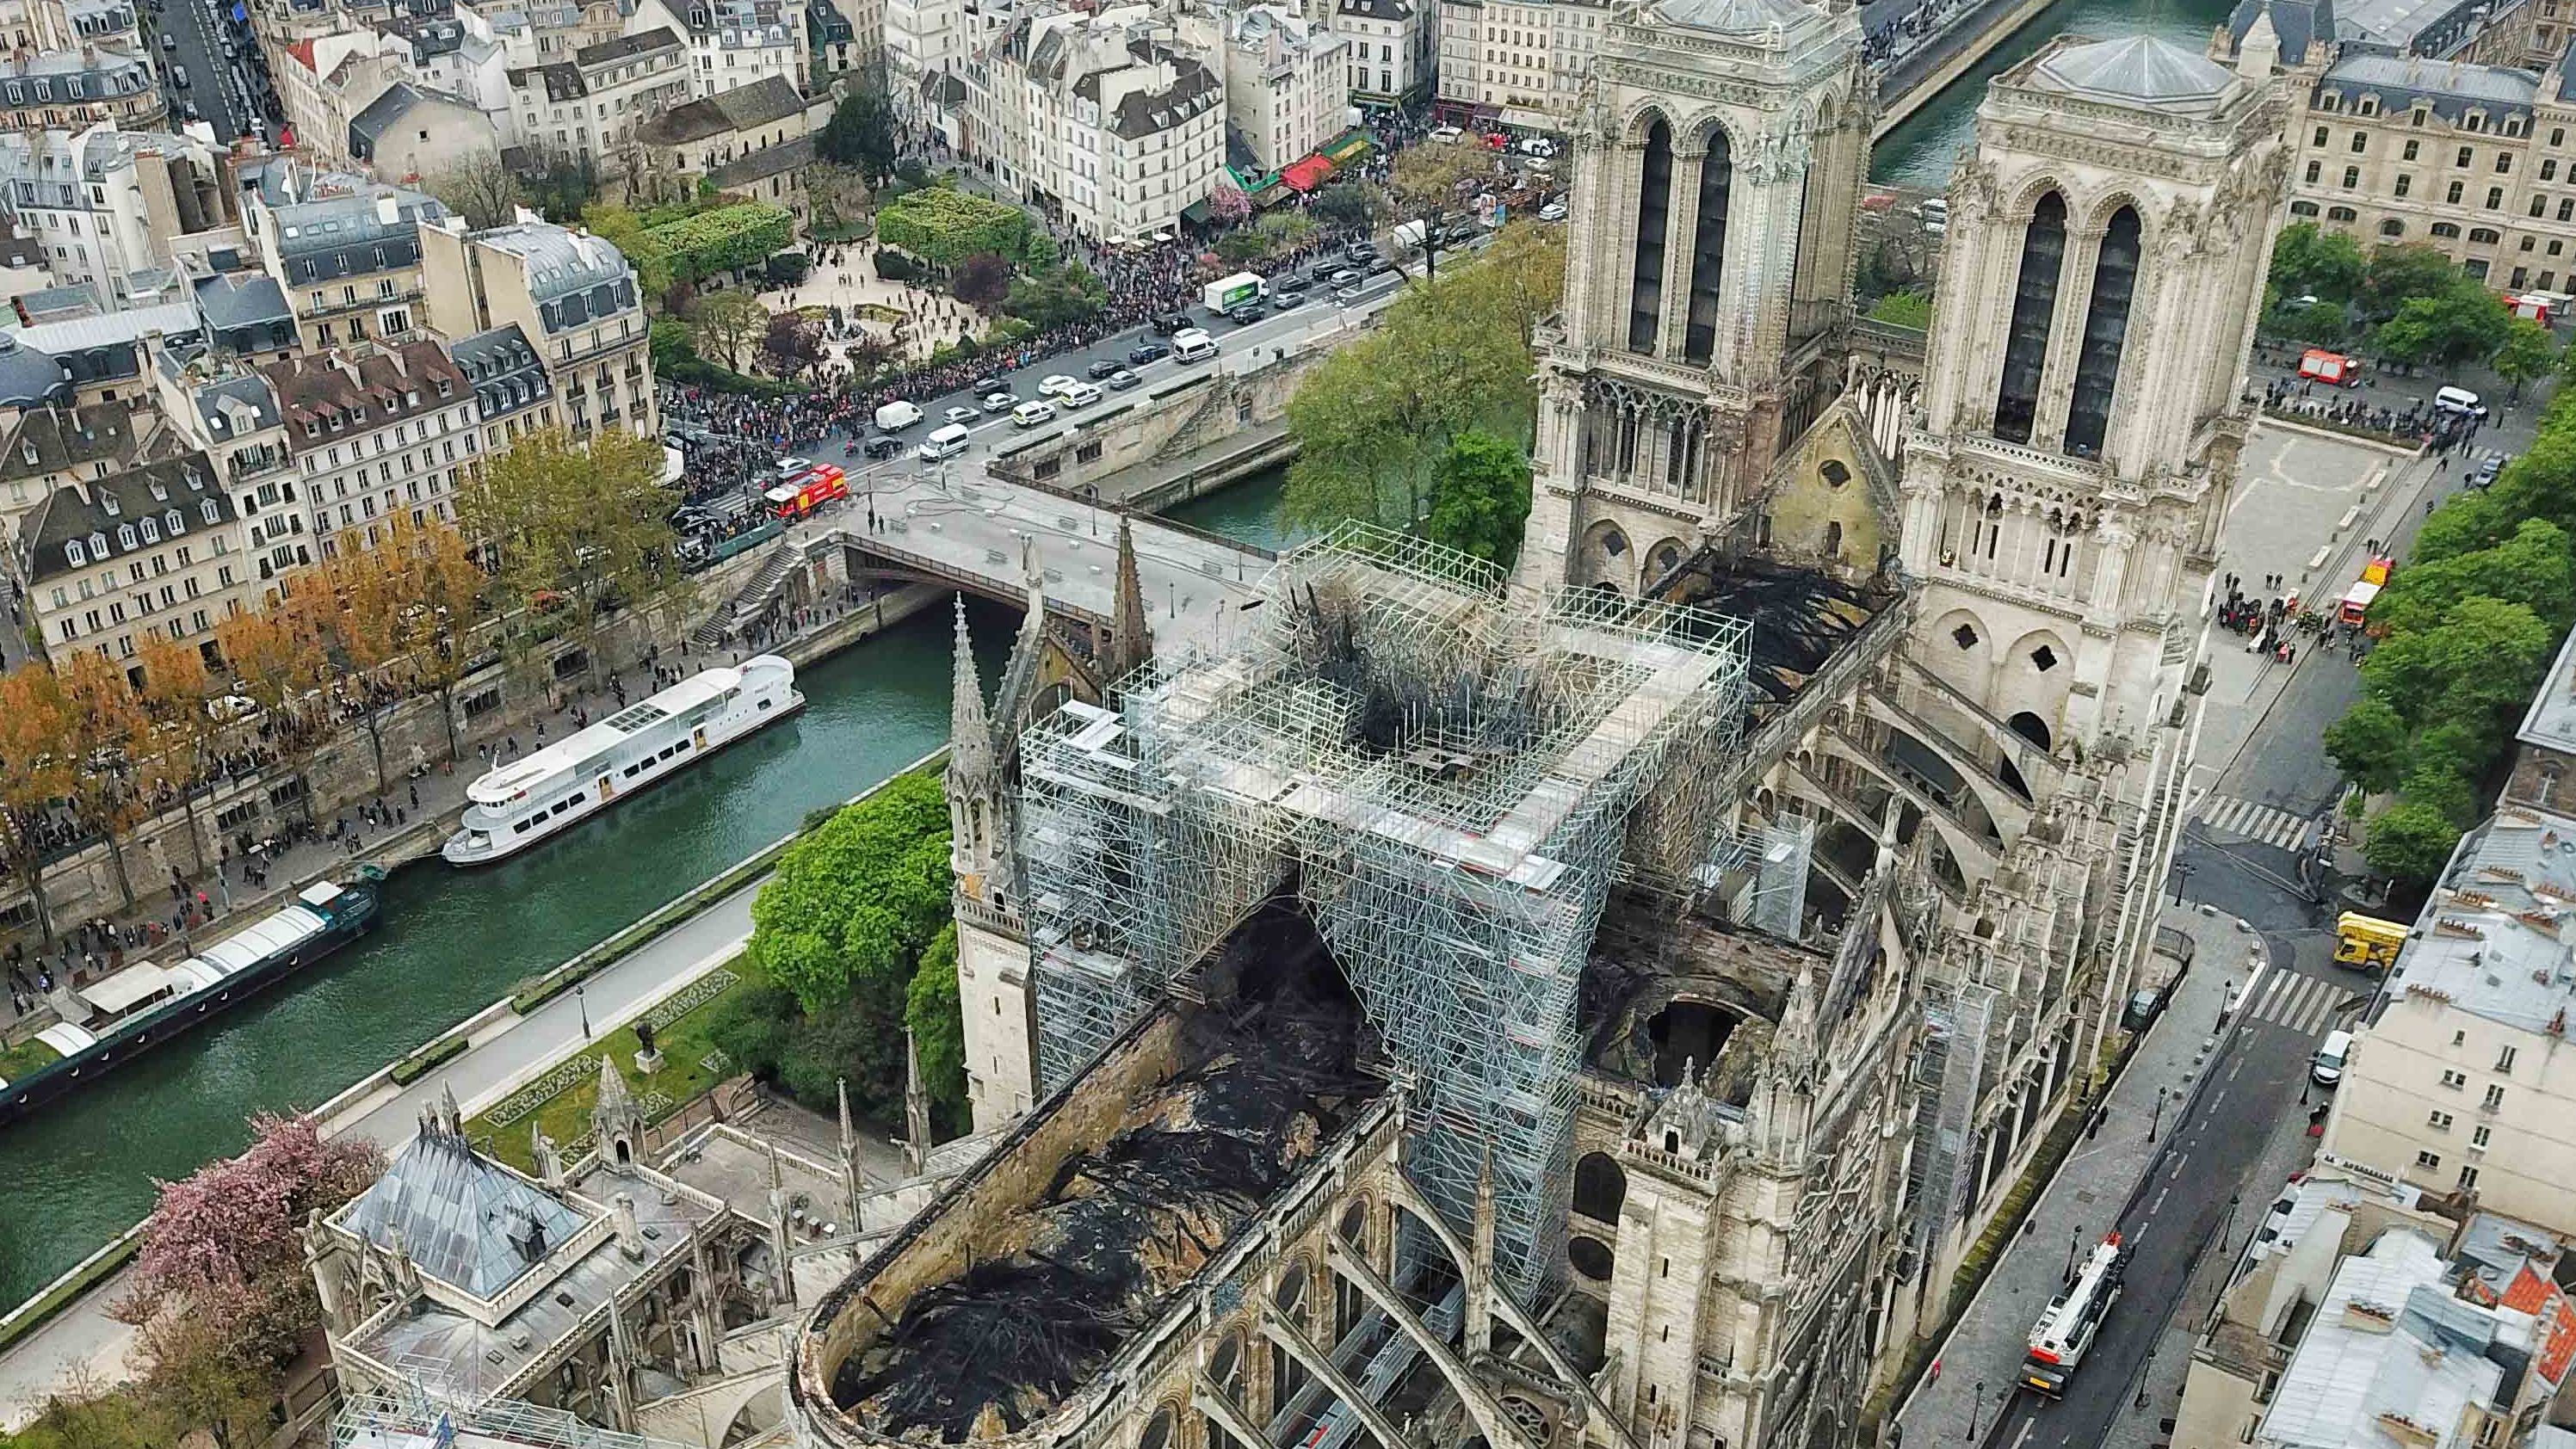 The blackened structure of Notre Dame cathedral, where a fire broke out on Monday.